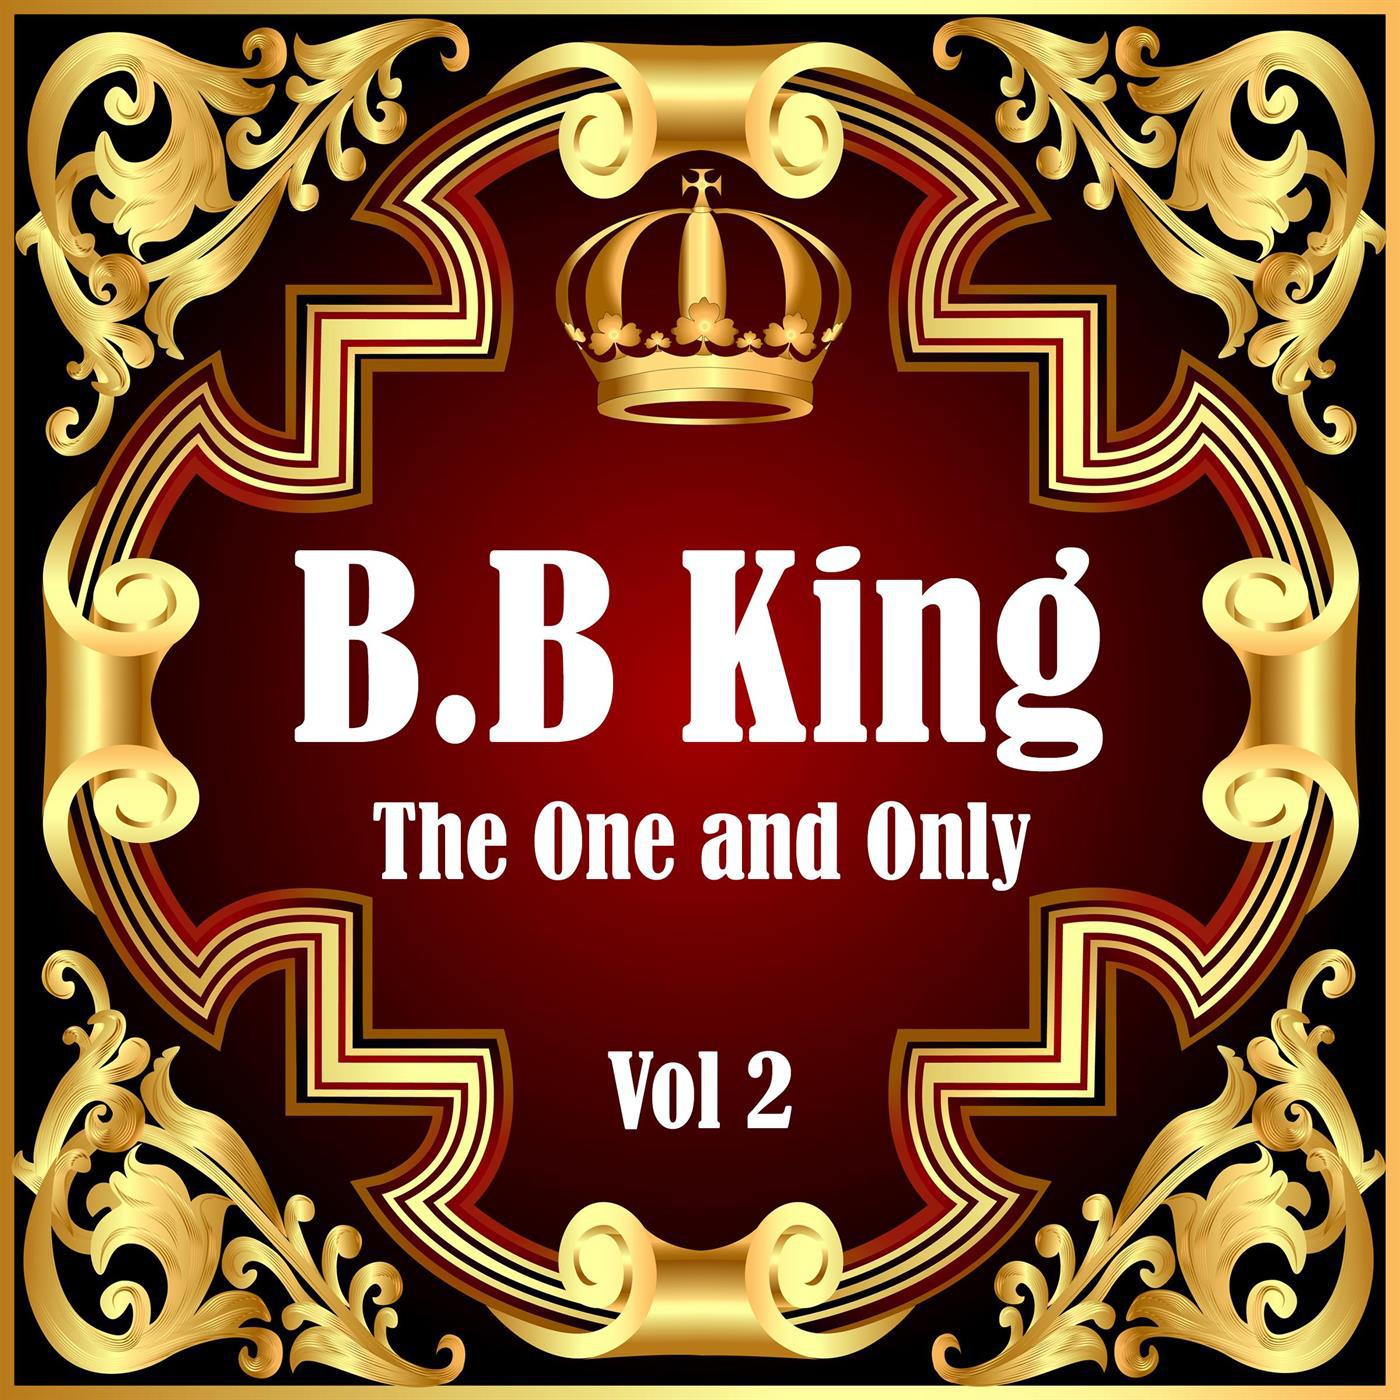 B.B King: The One and Only Vol 2